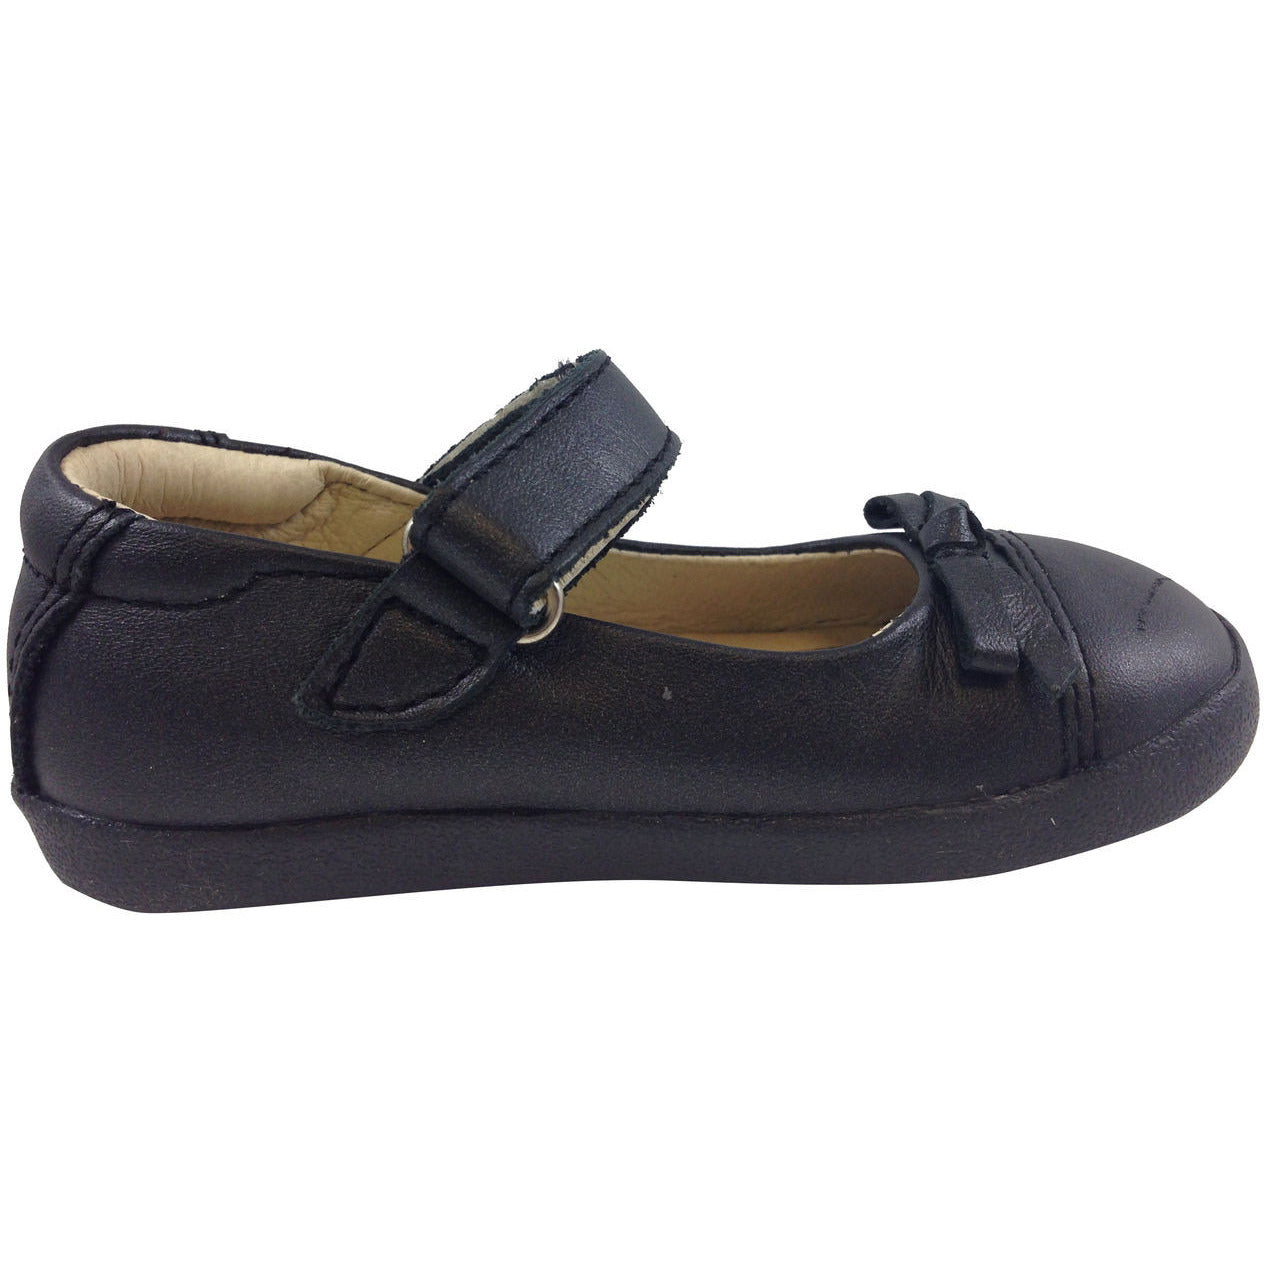 Old Soles Girl's 313 Black Sista Flat – Just Shoes for Kids